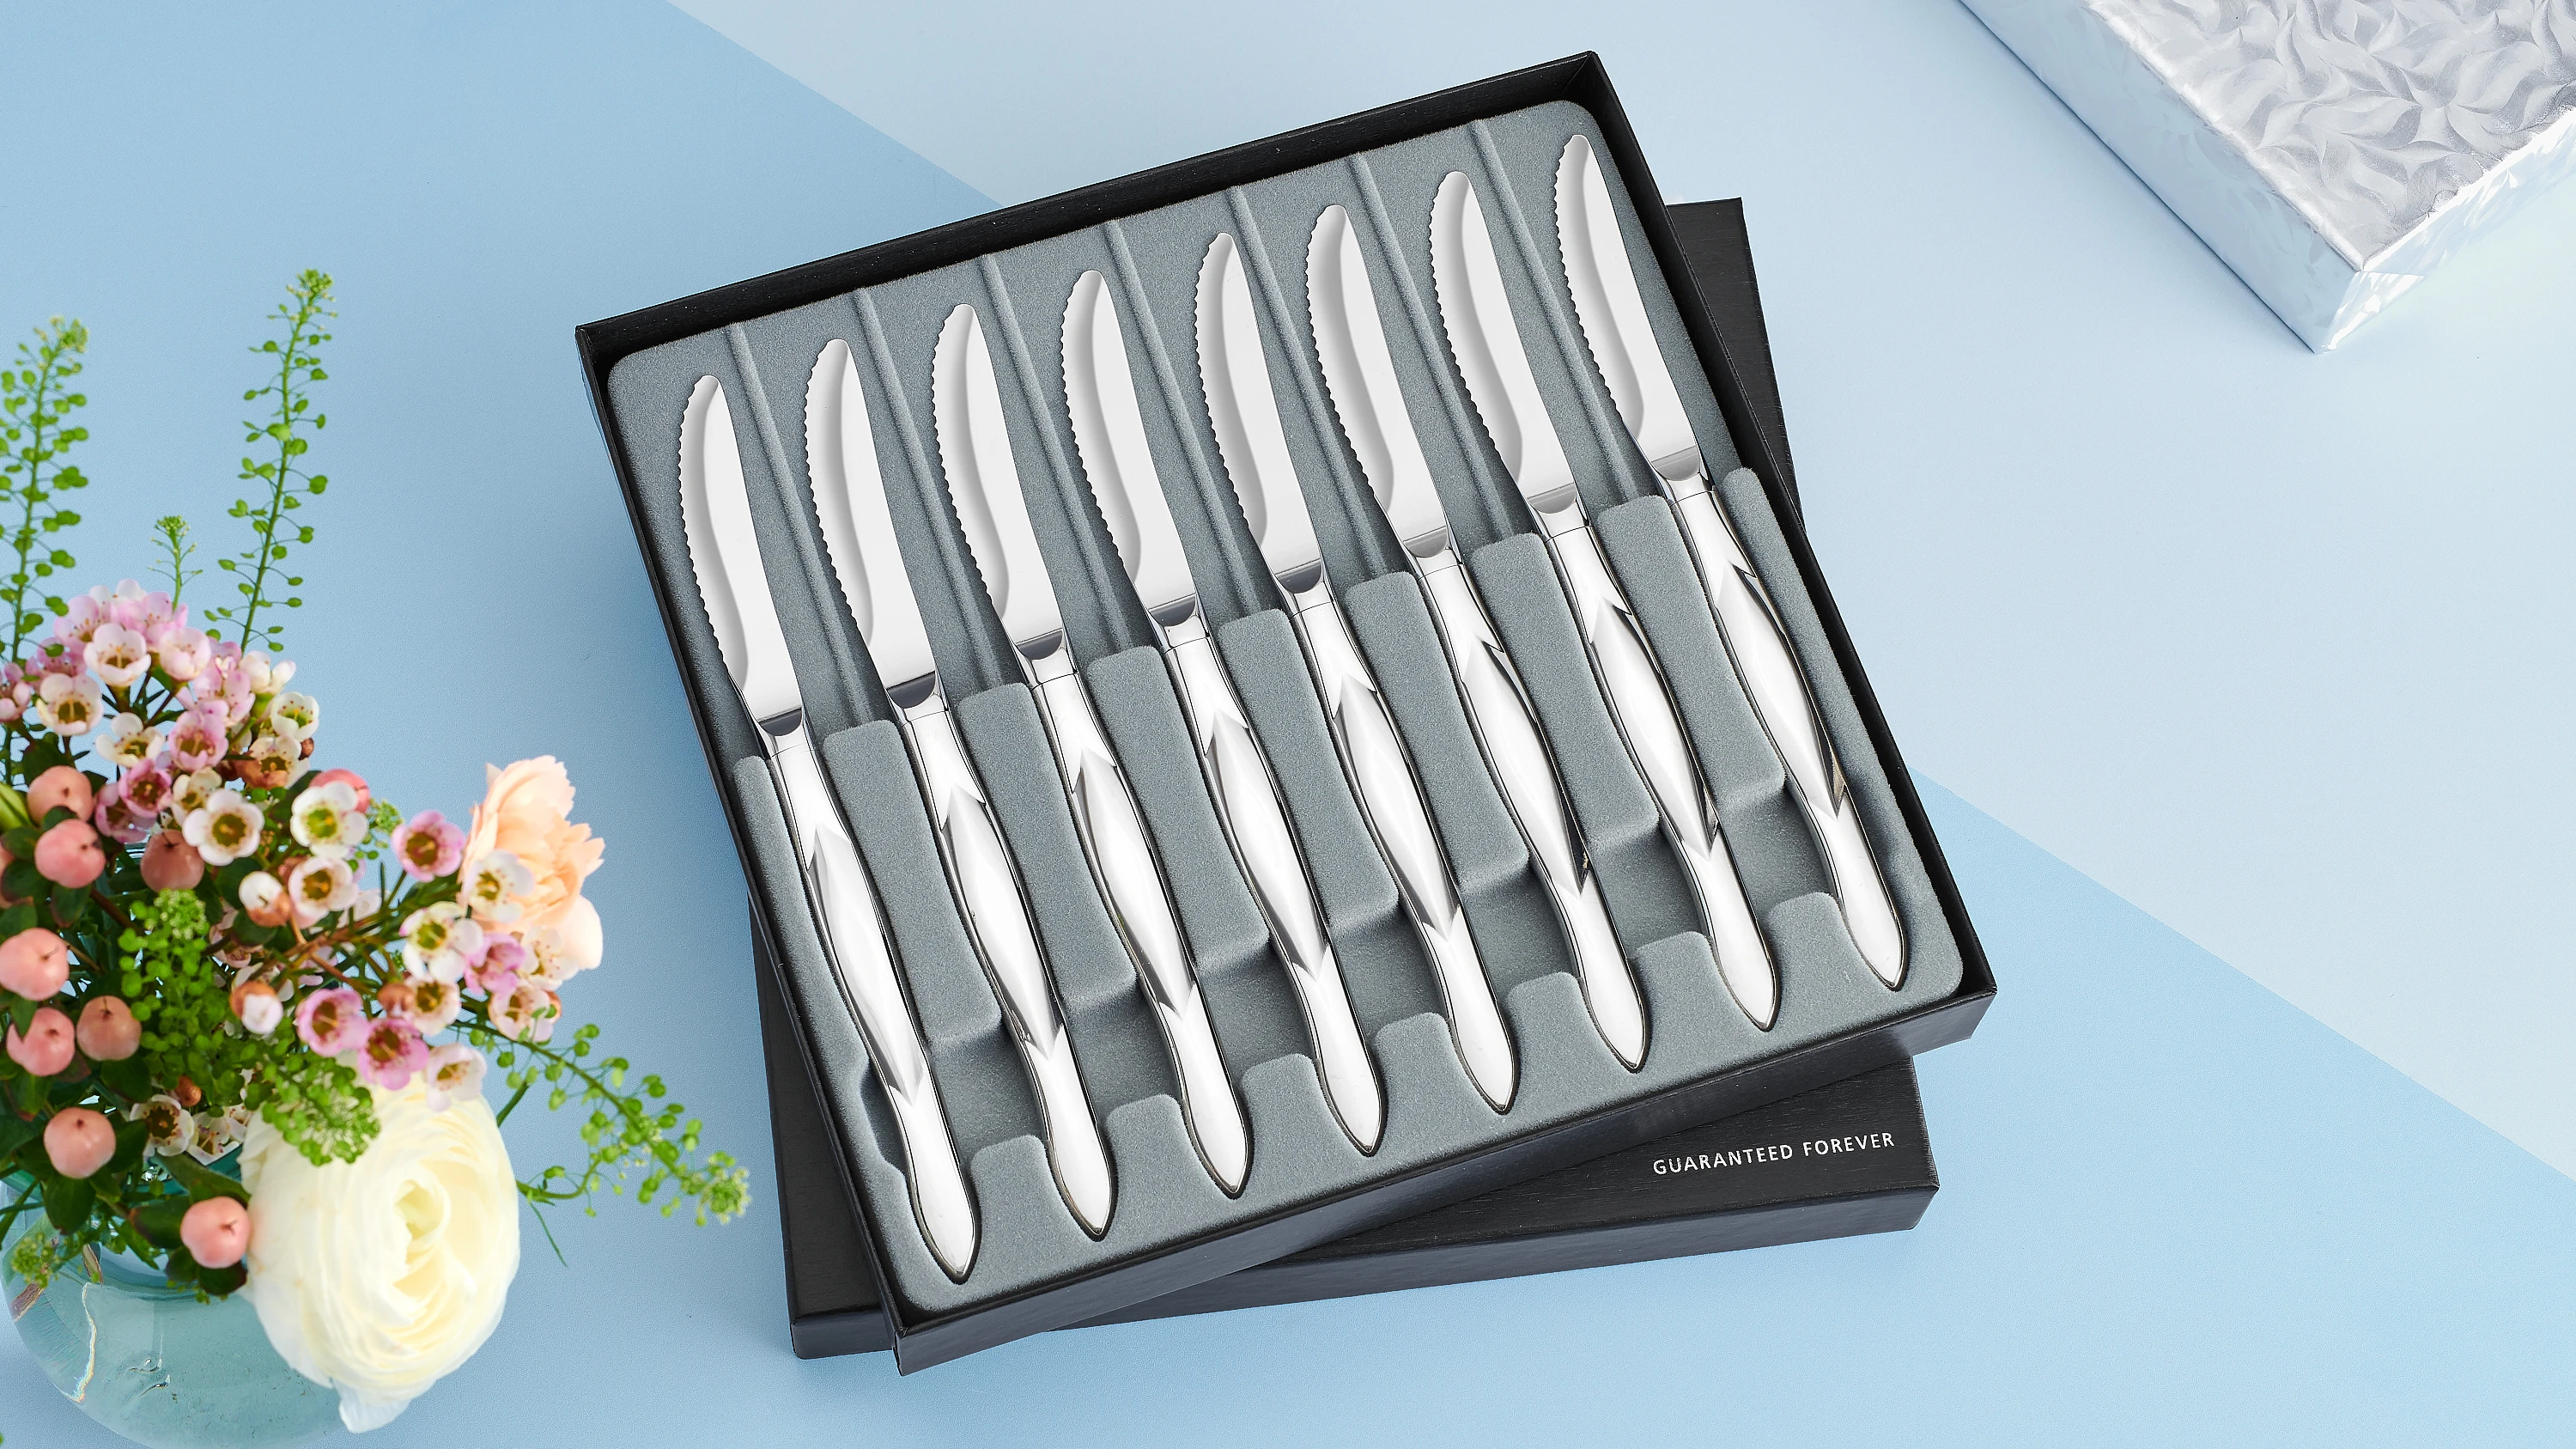 8-Pc. Table Knife Set in Gift Box